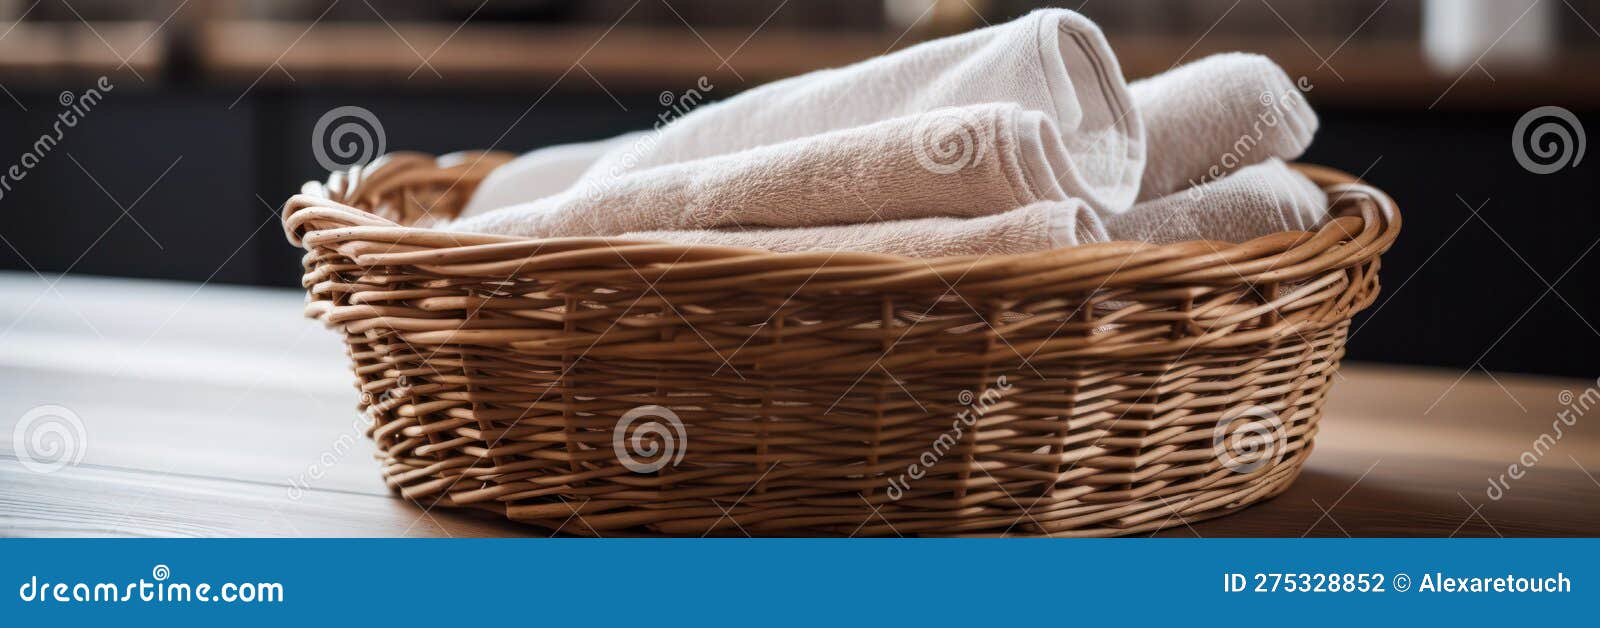 wicker basket with washed dry linen close-up. washday